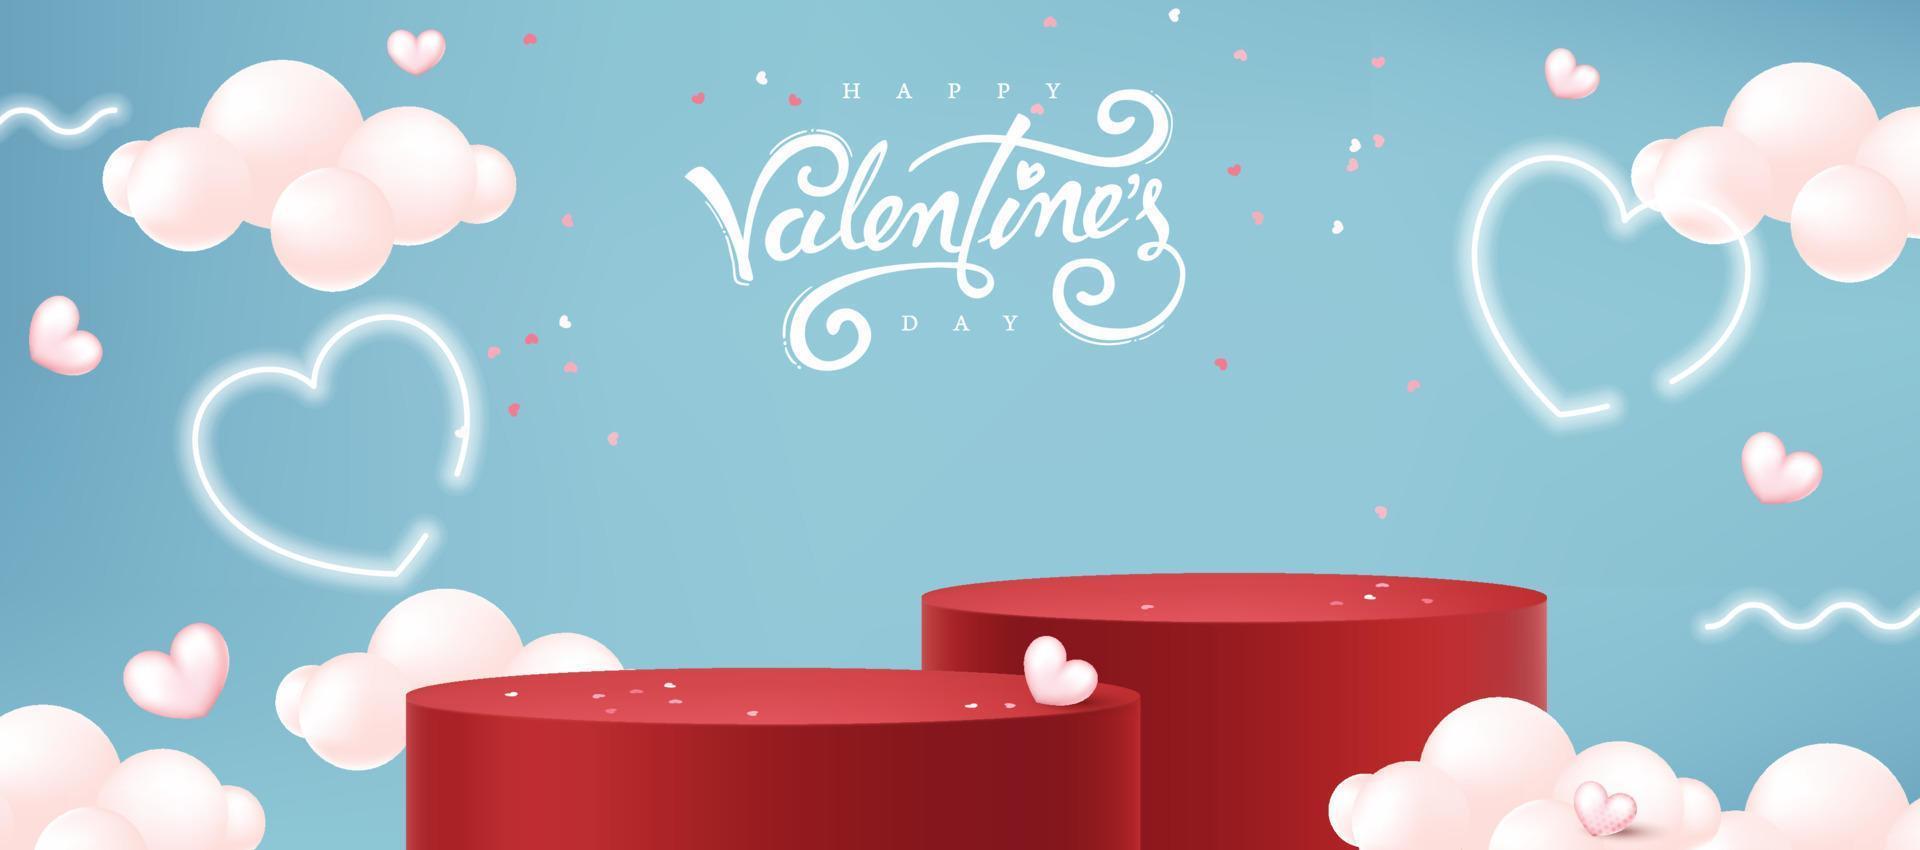 Valentines day background with Heart Shaped Balloons. vector